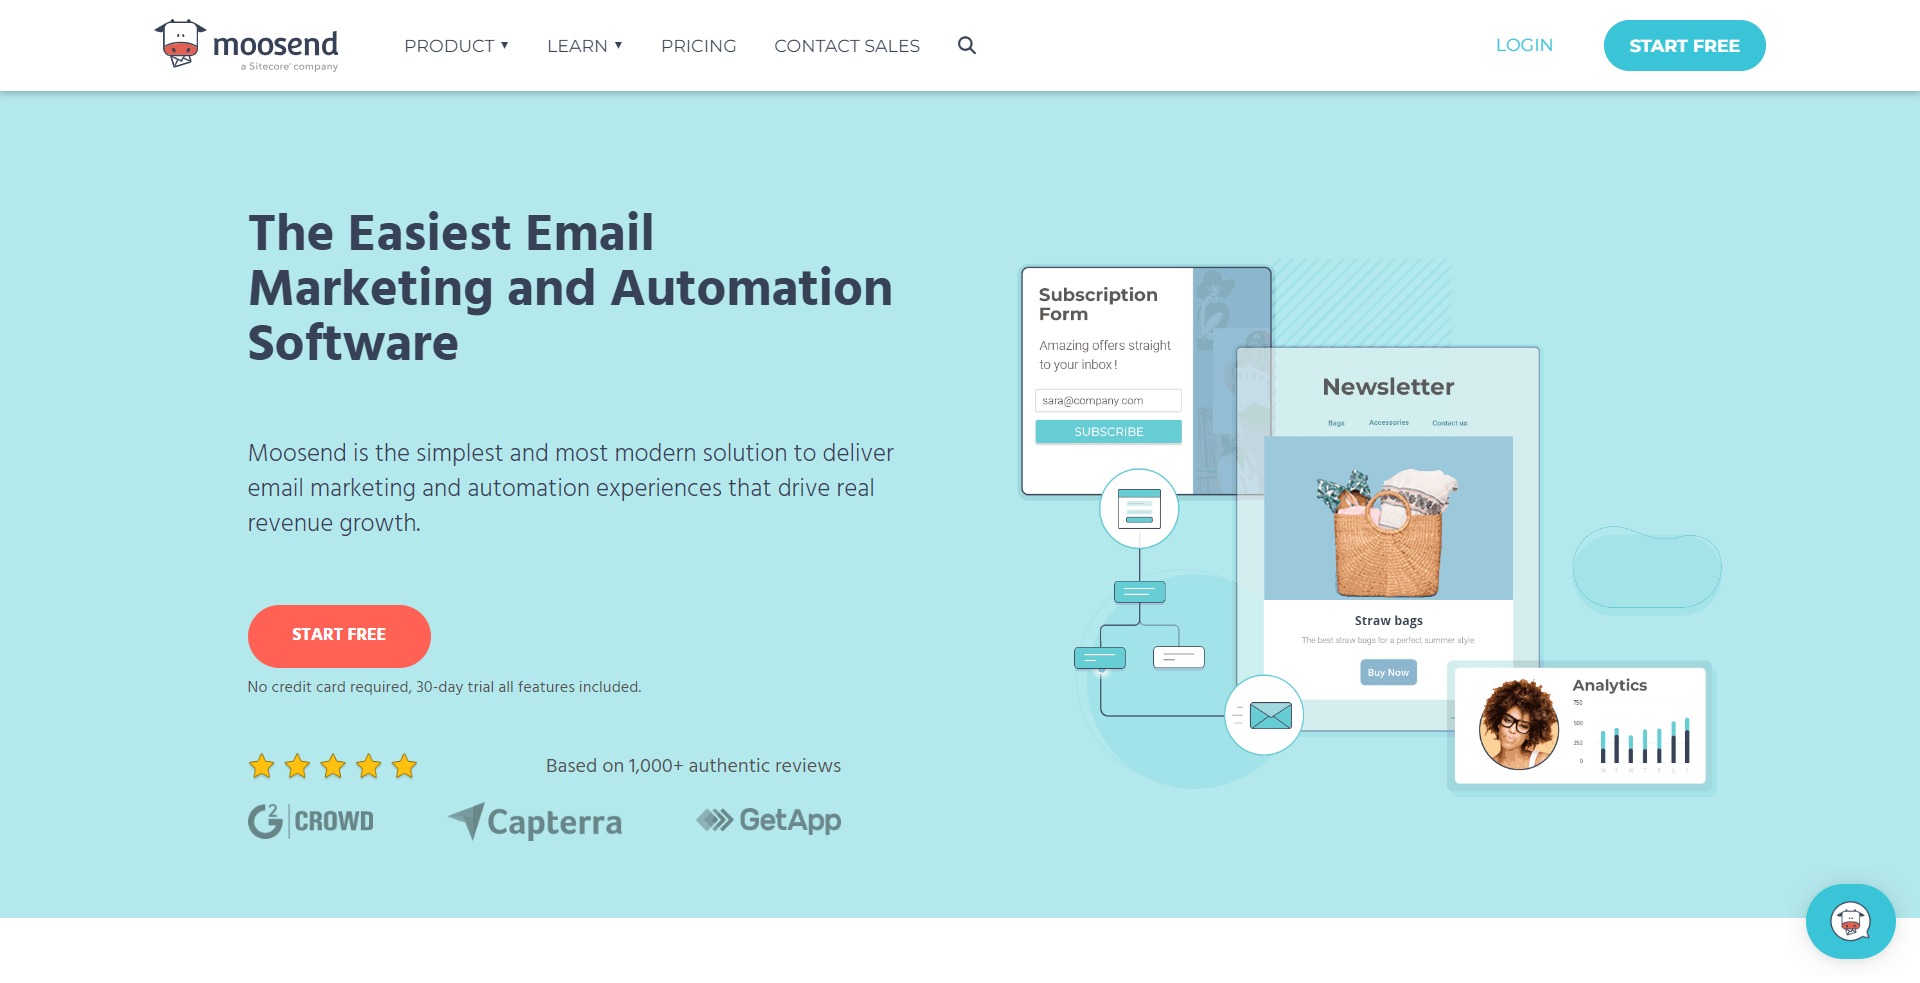 Moosend best free email marketing tools and services lookinglion